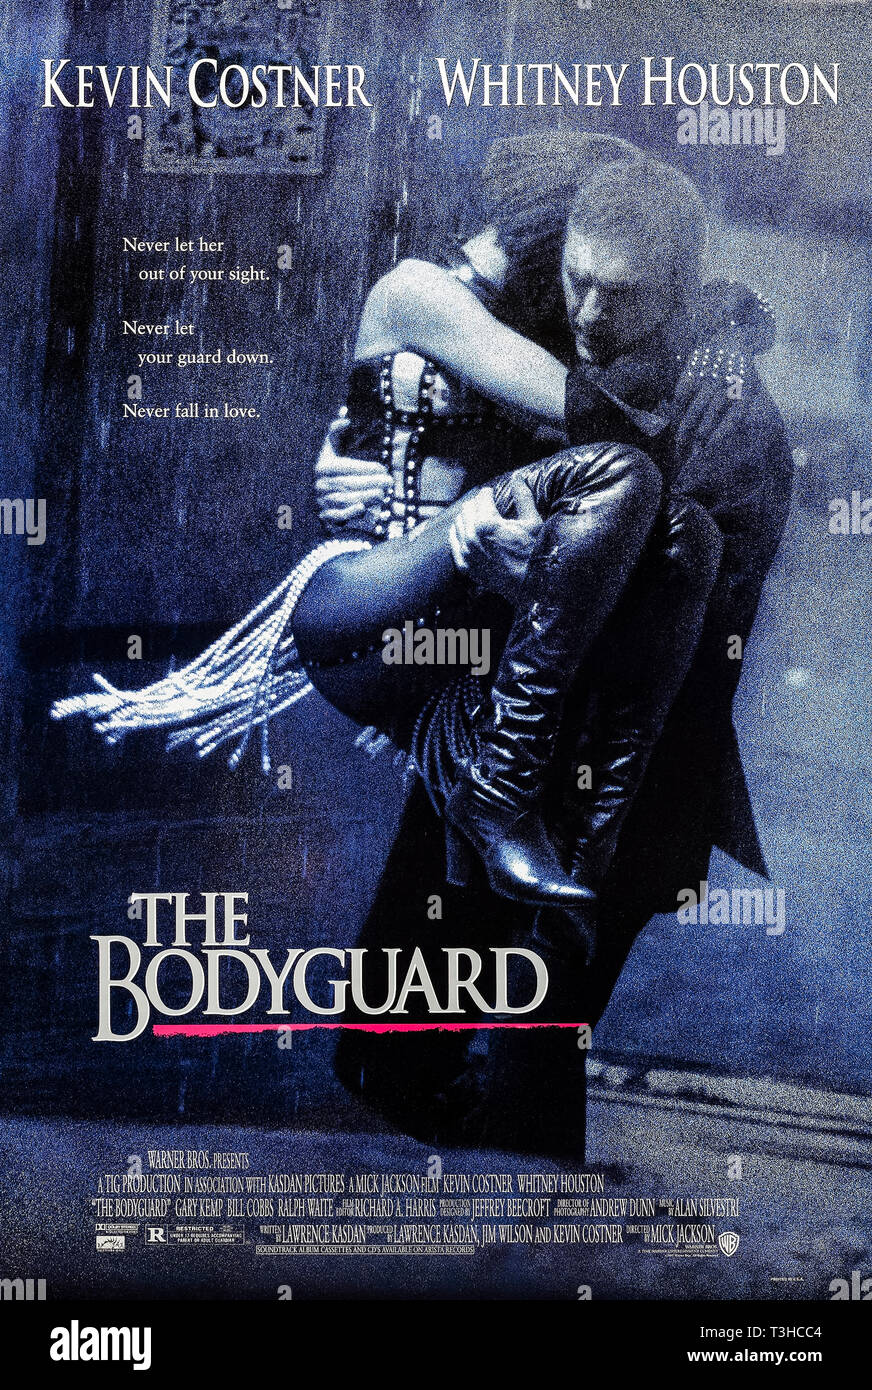 The Bodyguard (1992) directed by Mick Jackson and starring Kevin Costner, Whitney Houston and Gary Kemp. A bodyguard falls in love with a pop singer he is hired to protect against a stalker. Stock Photo